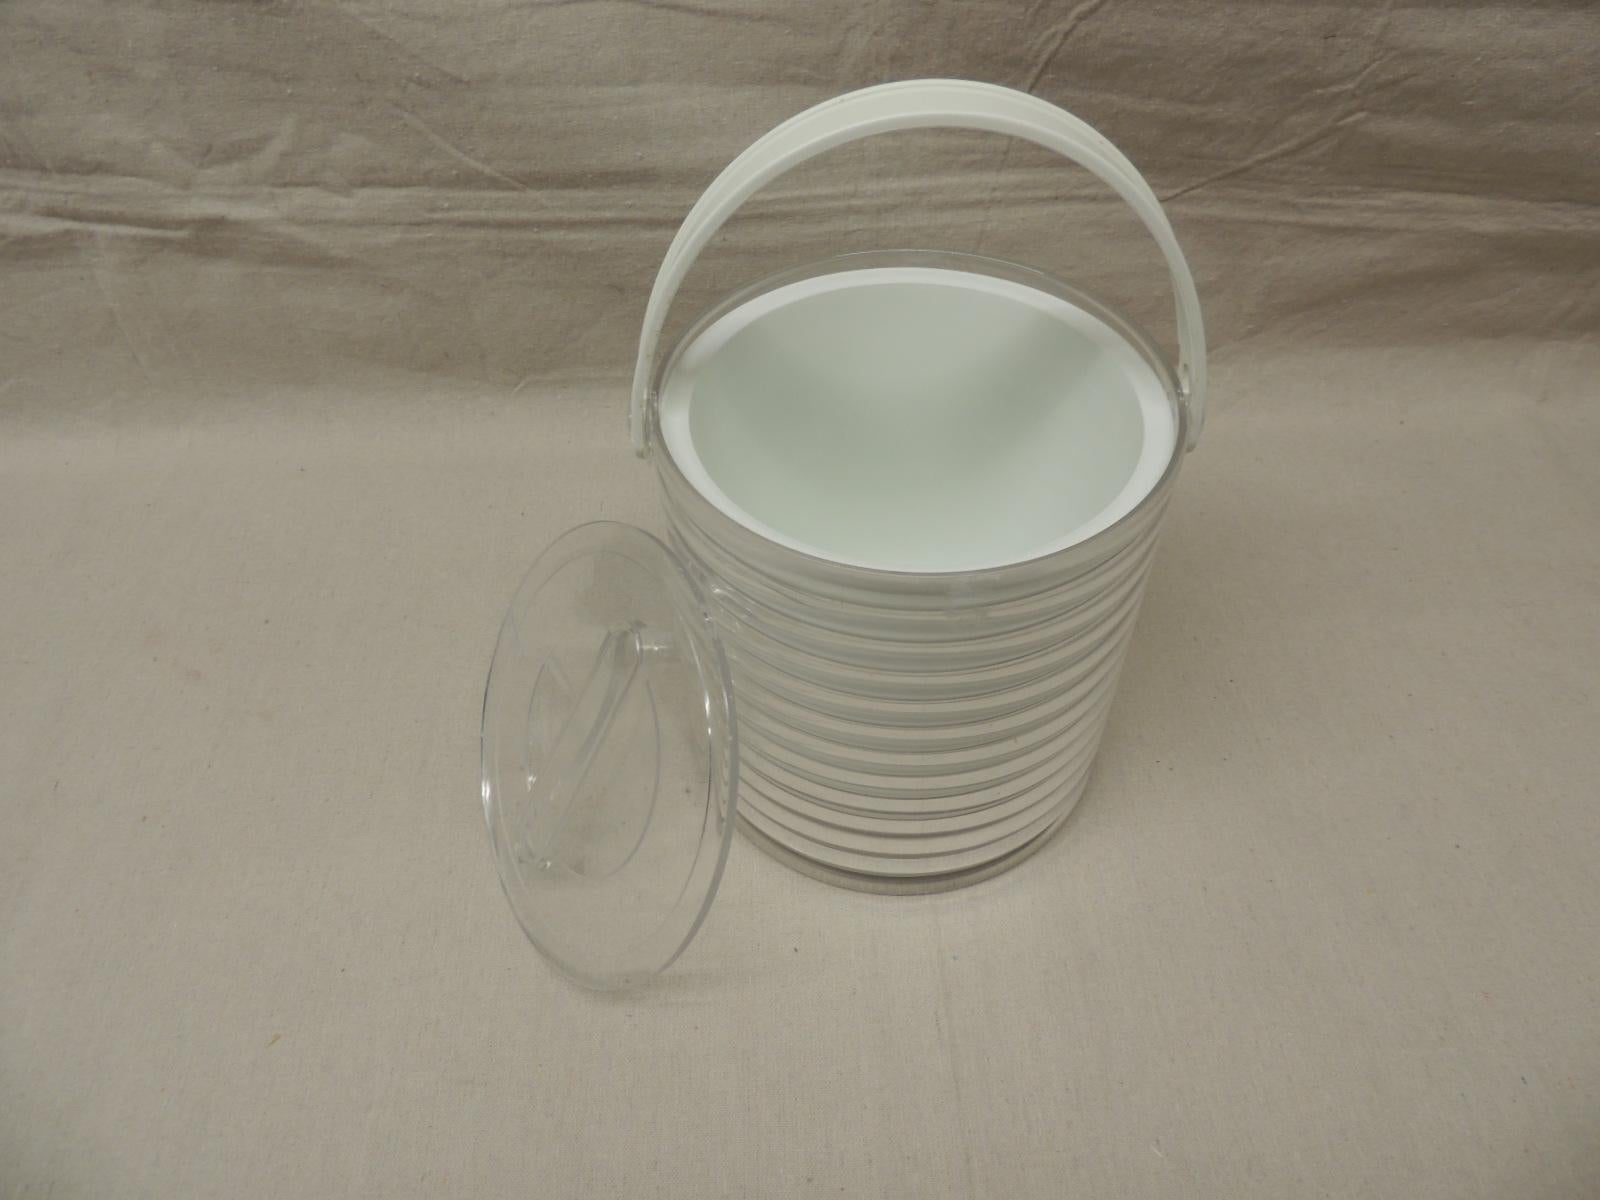 A vintage, Lucite ice bucket in clear and white that is from the 1980s in America.
Measures: 9